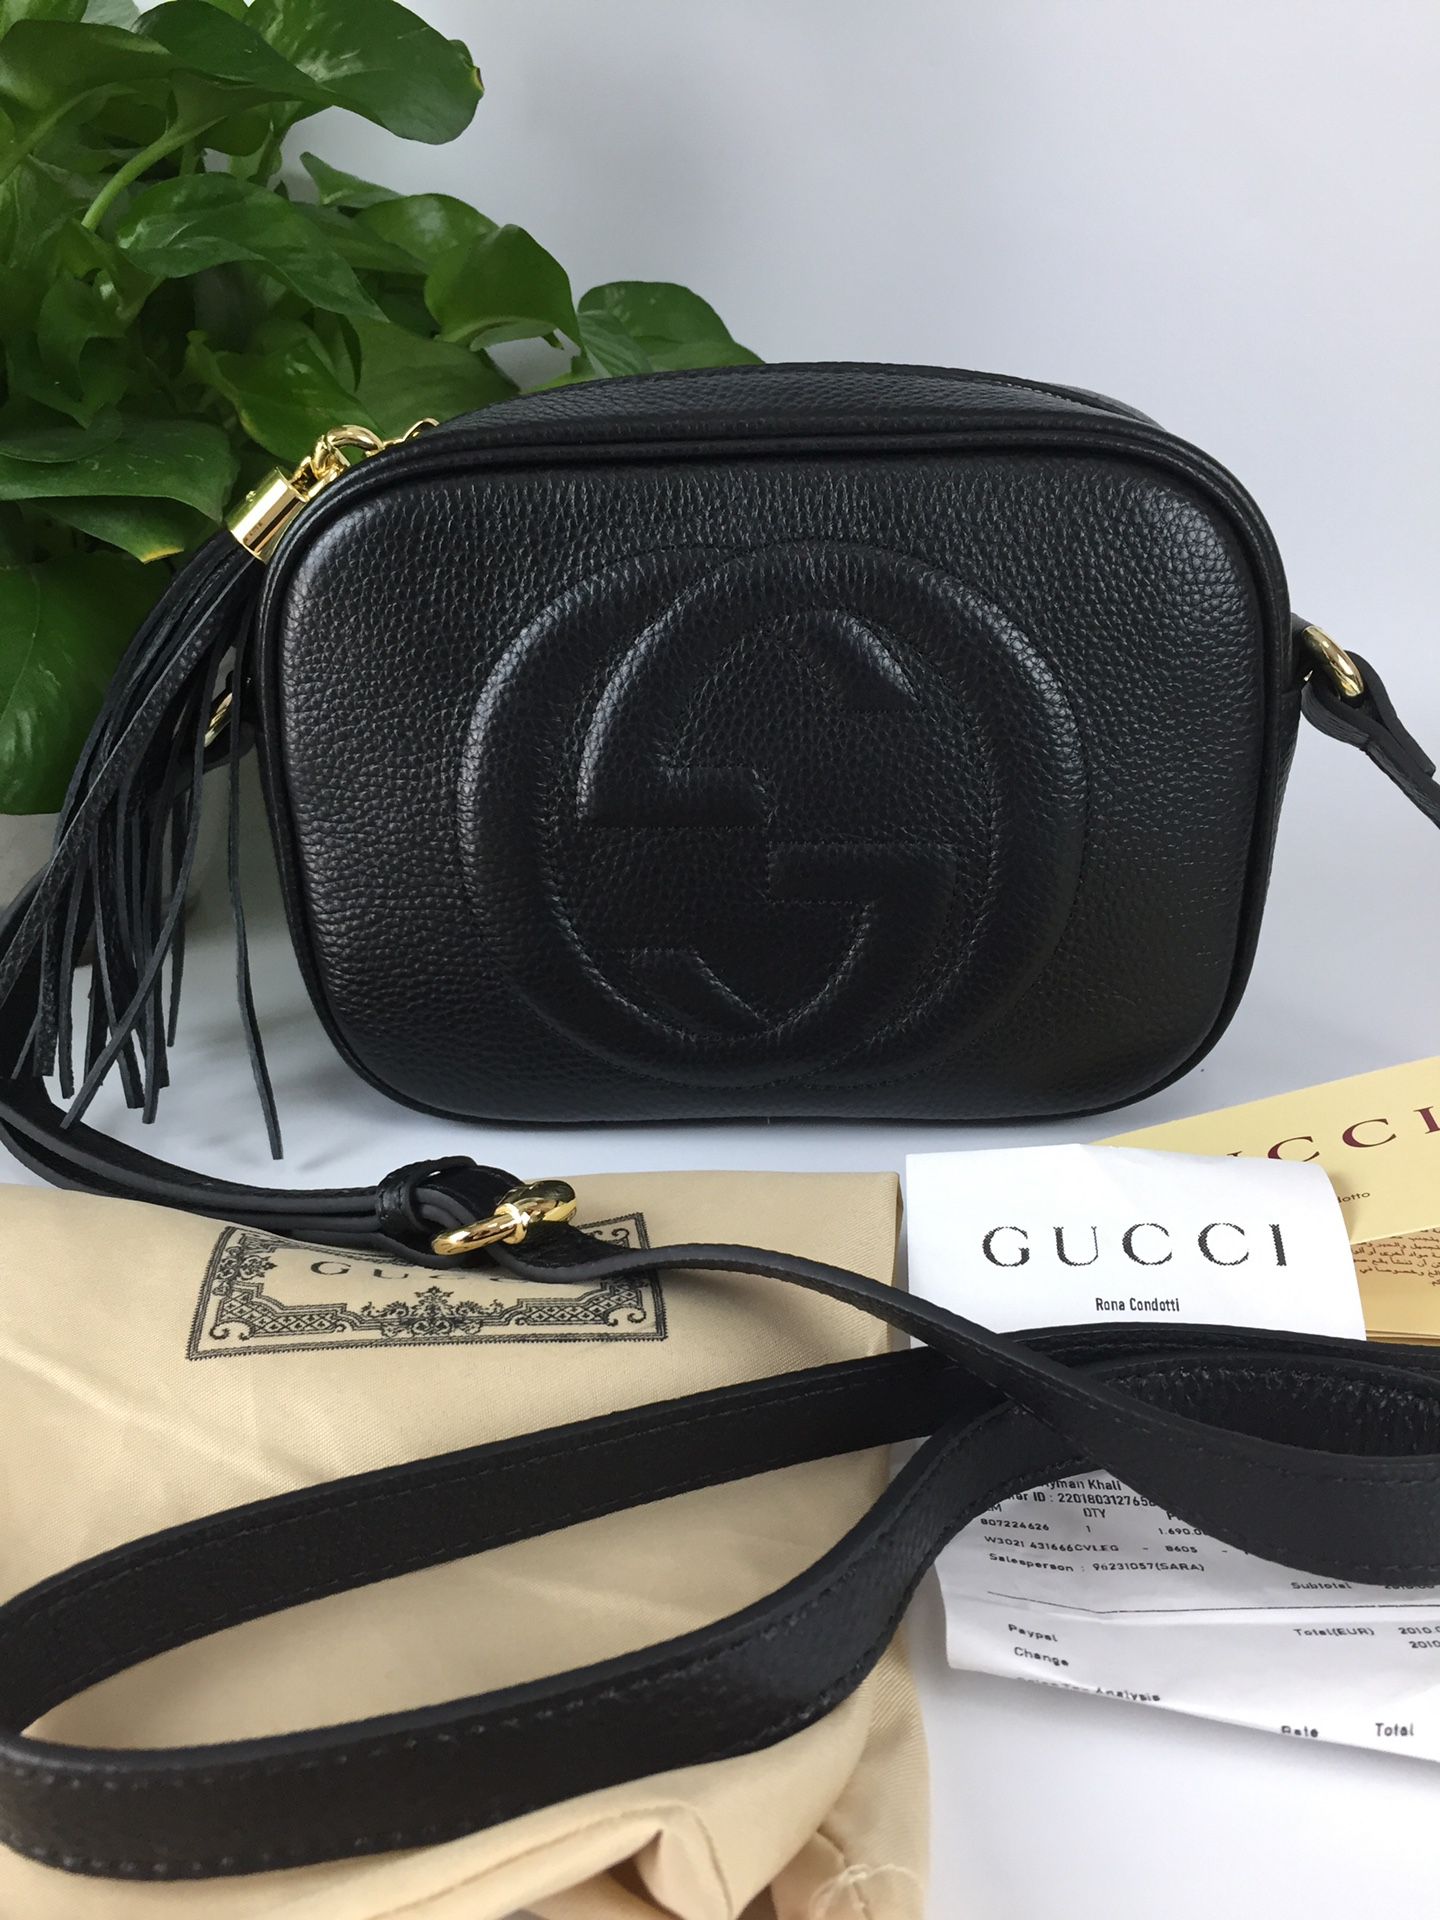 bryder daggry Perfervid krans Authentic Gucci bag black GG casual tassel bag single shoulder crossbody  authentic ladies bag GUCCI for Sale in Willowbrook, KS - OfferUp